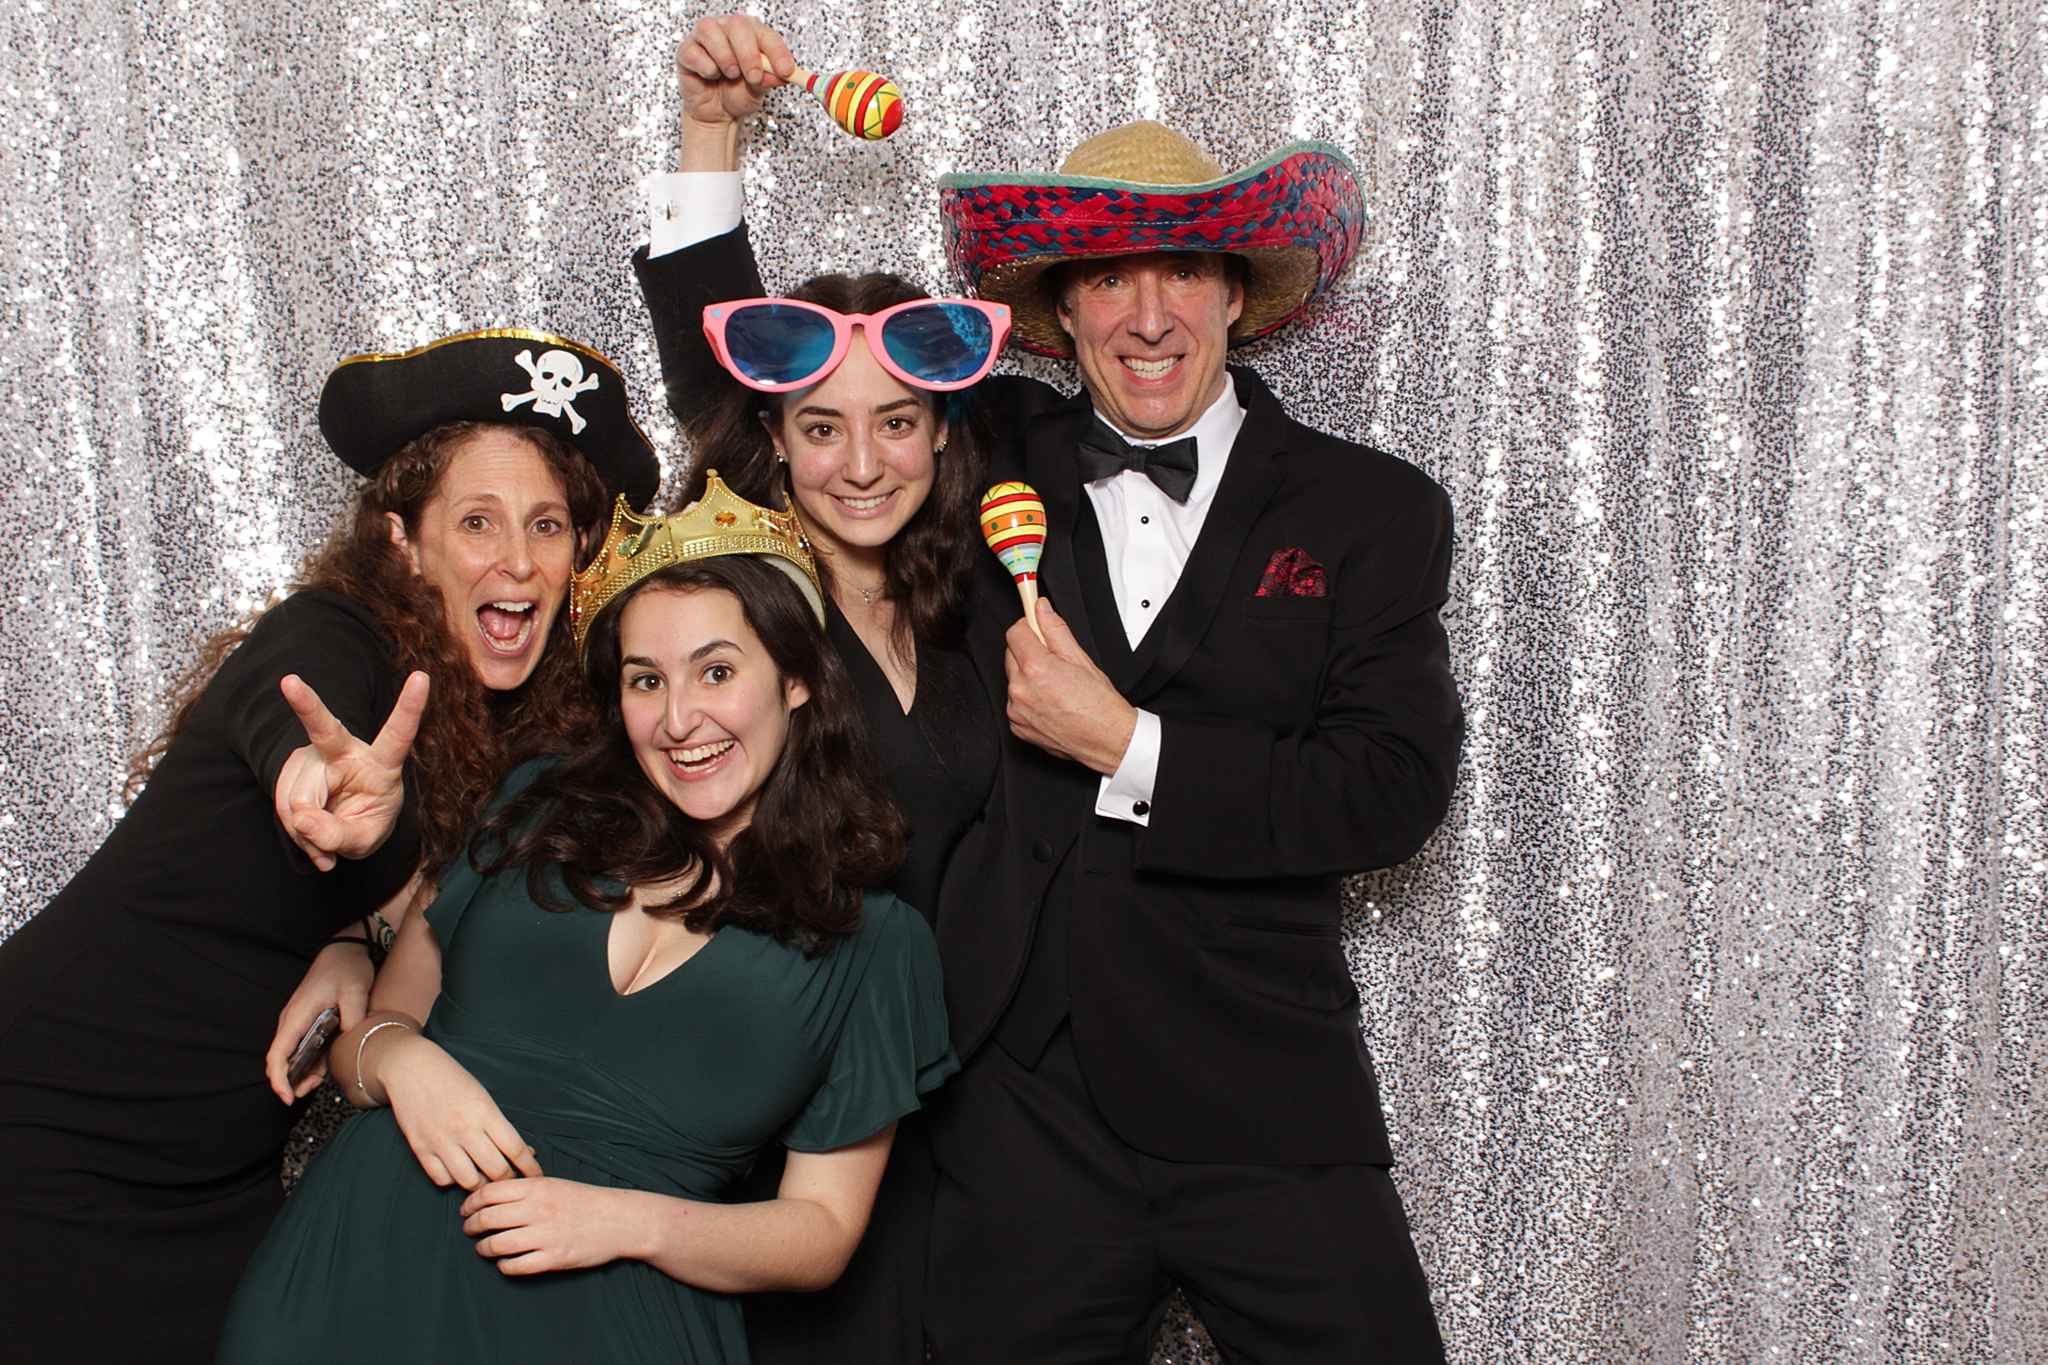 wedding guests play with props during photo booth